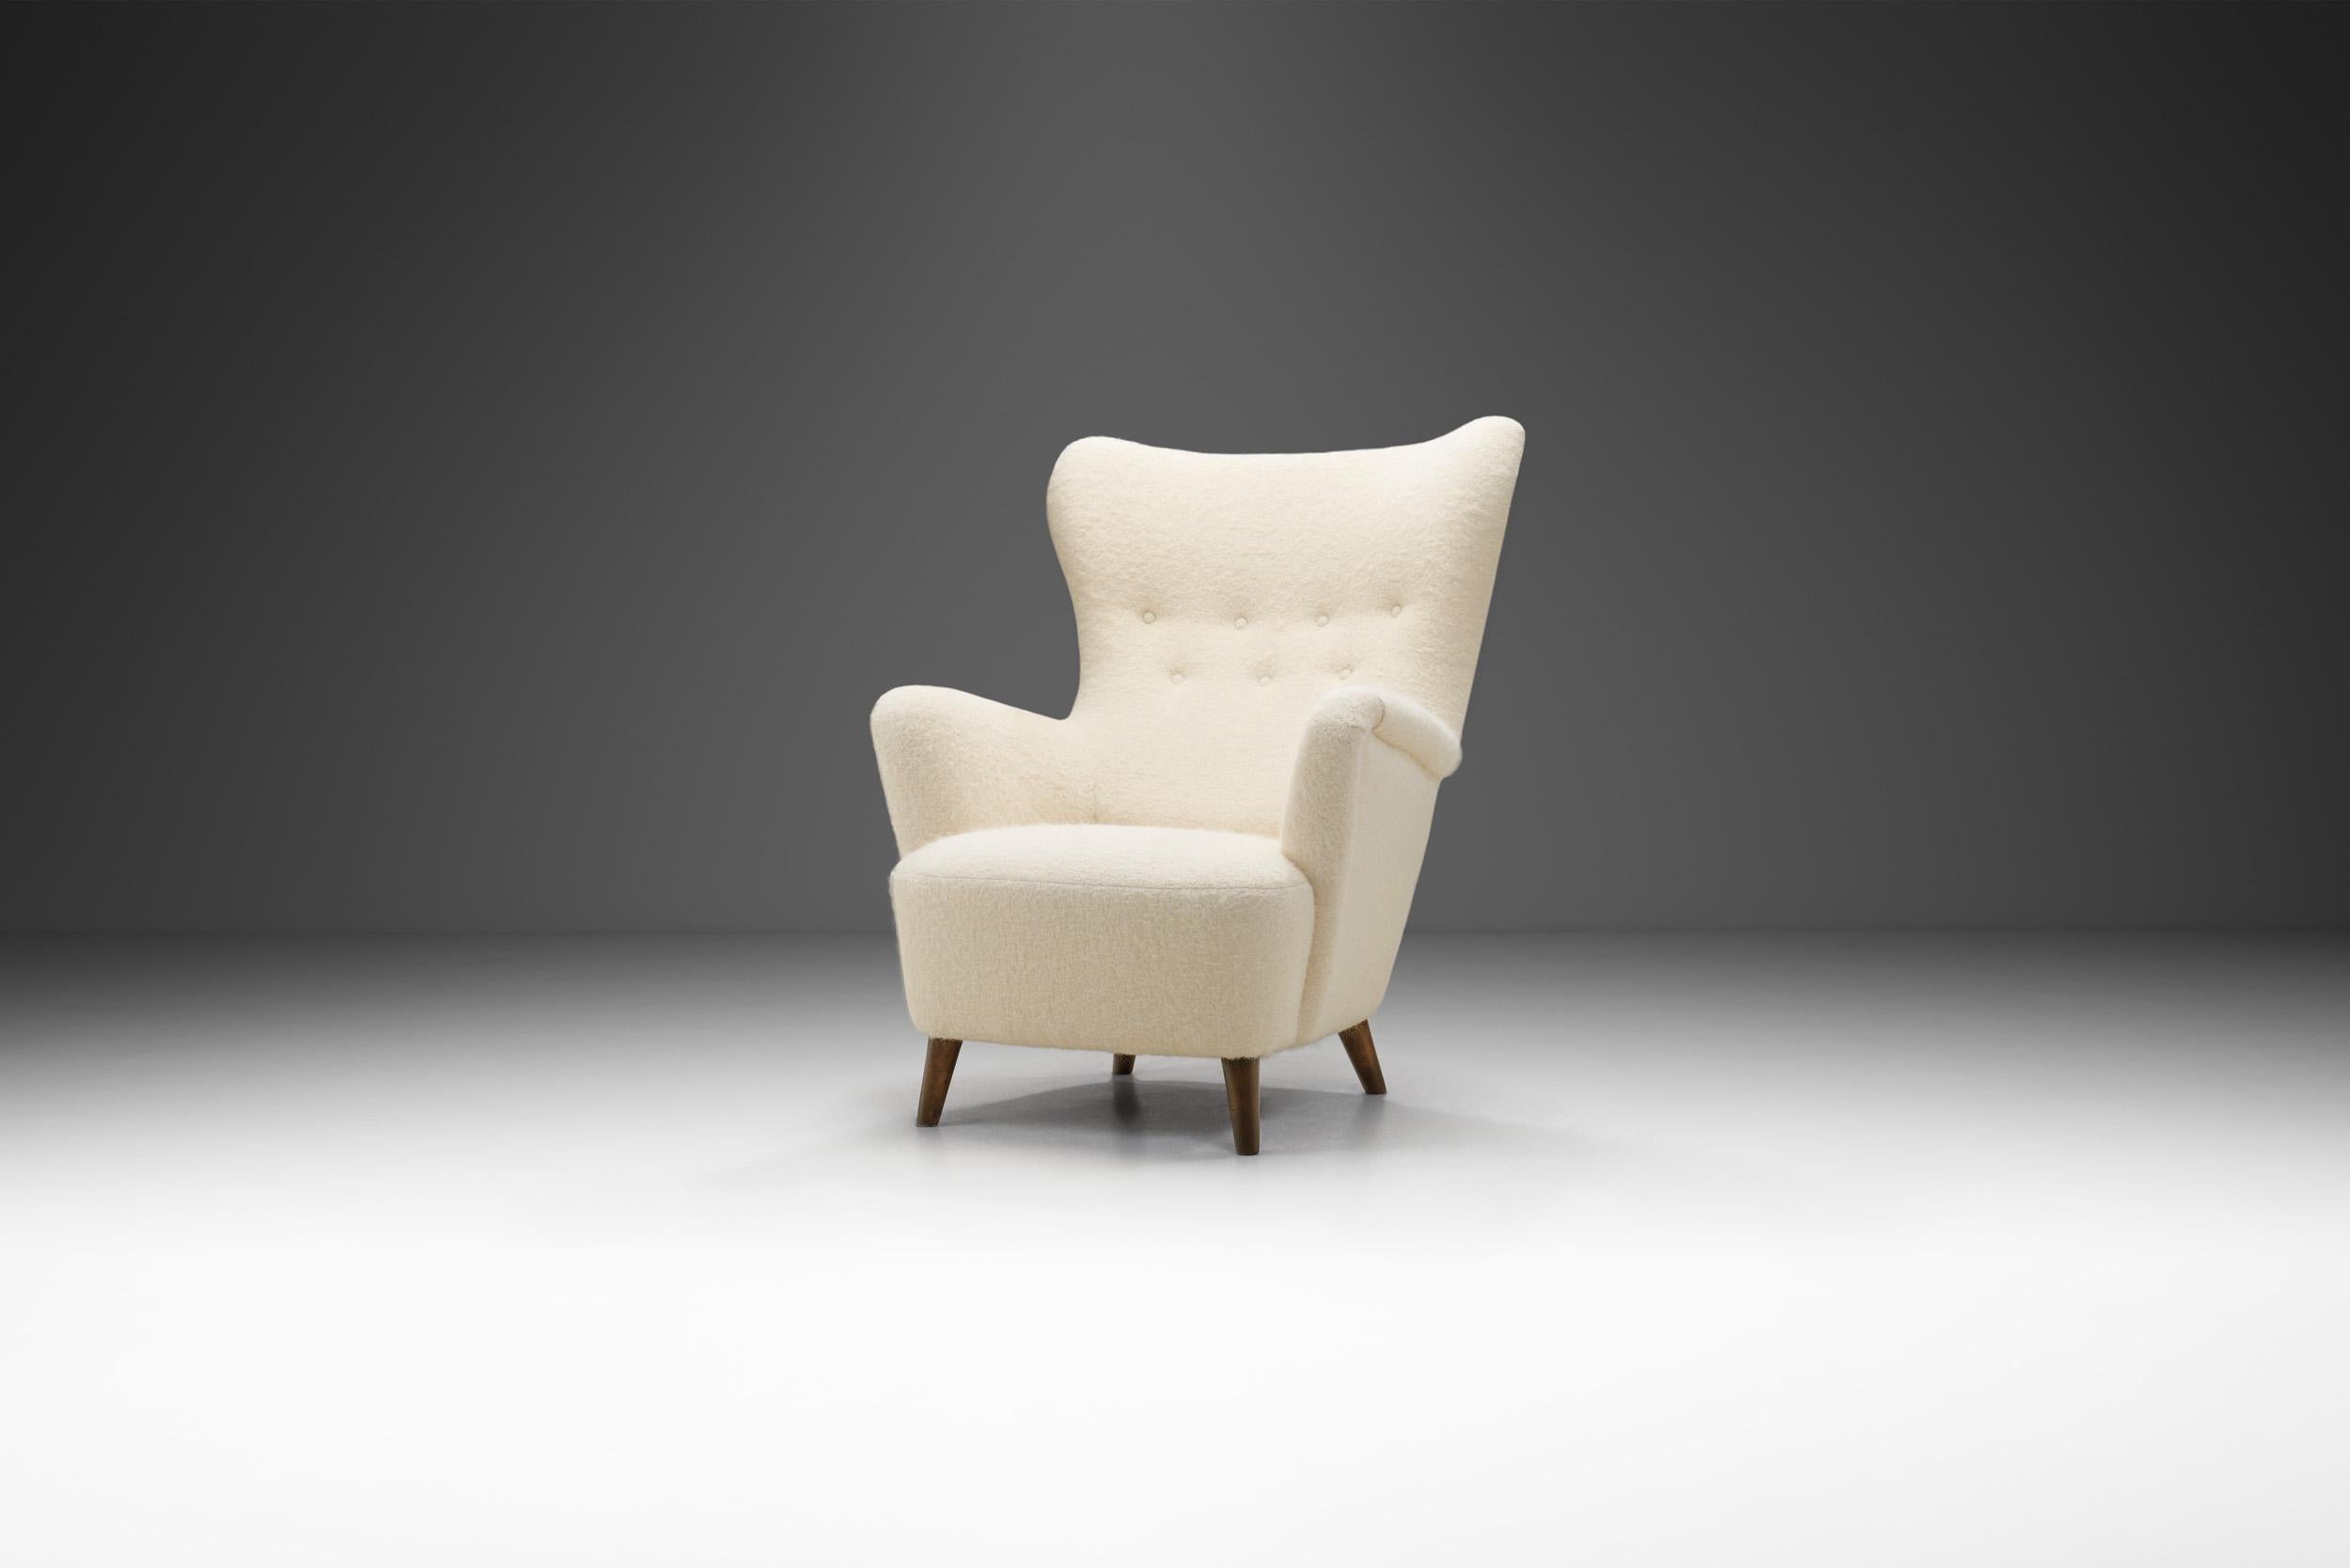 Scandinavian Modernism can be visually described by this beautiful armchair: sleek, organic and timeless. These attributes are met with high quality materials and the famous craftsmanship of Scandinavian cabinetmakers.

This curved armchair’s